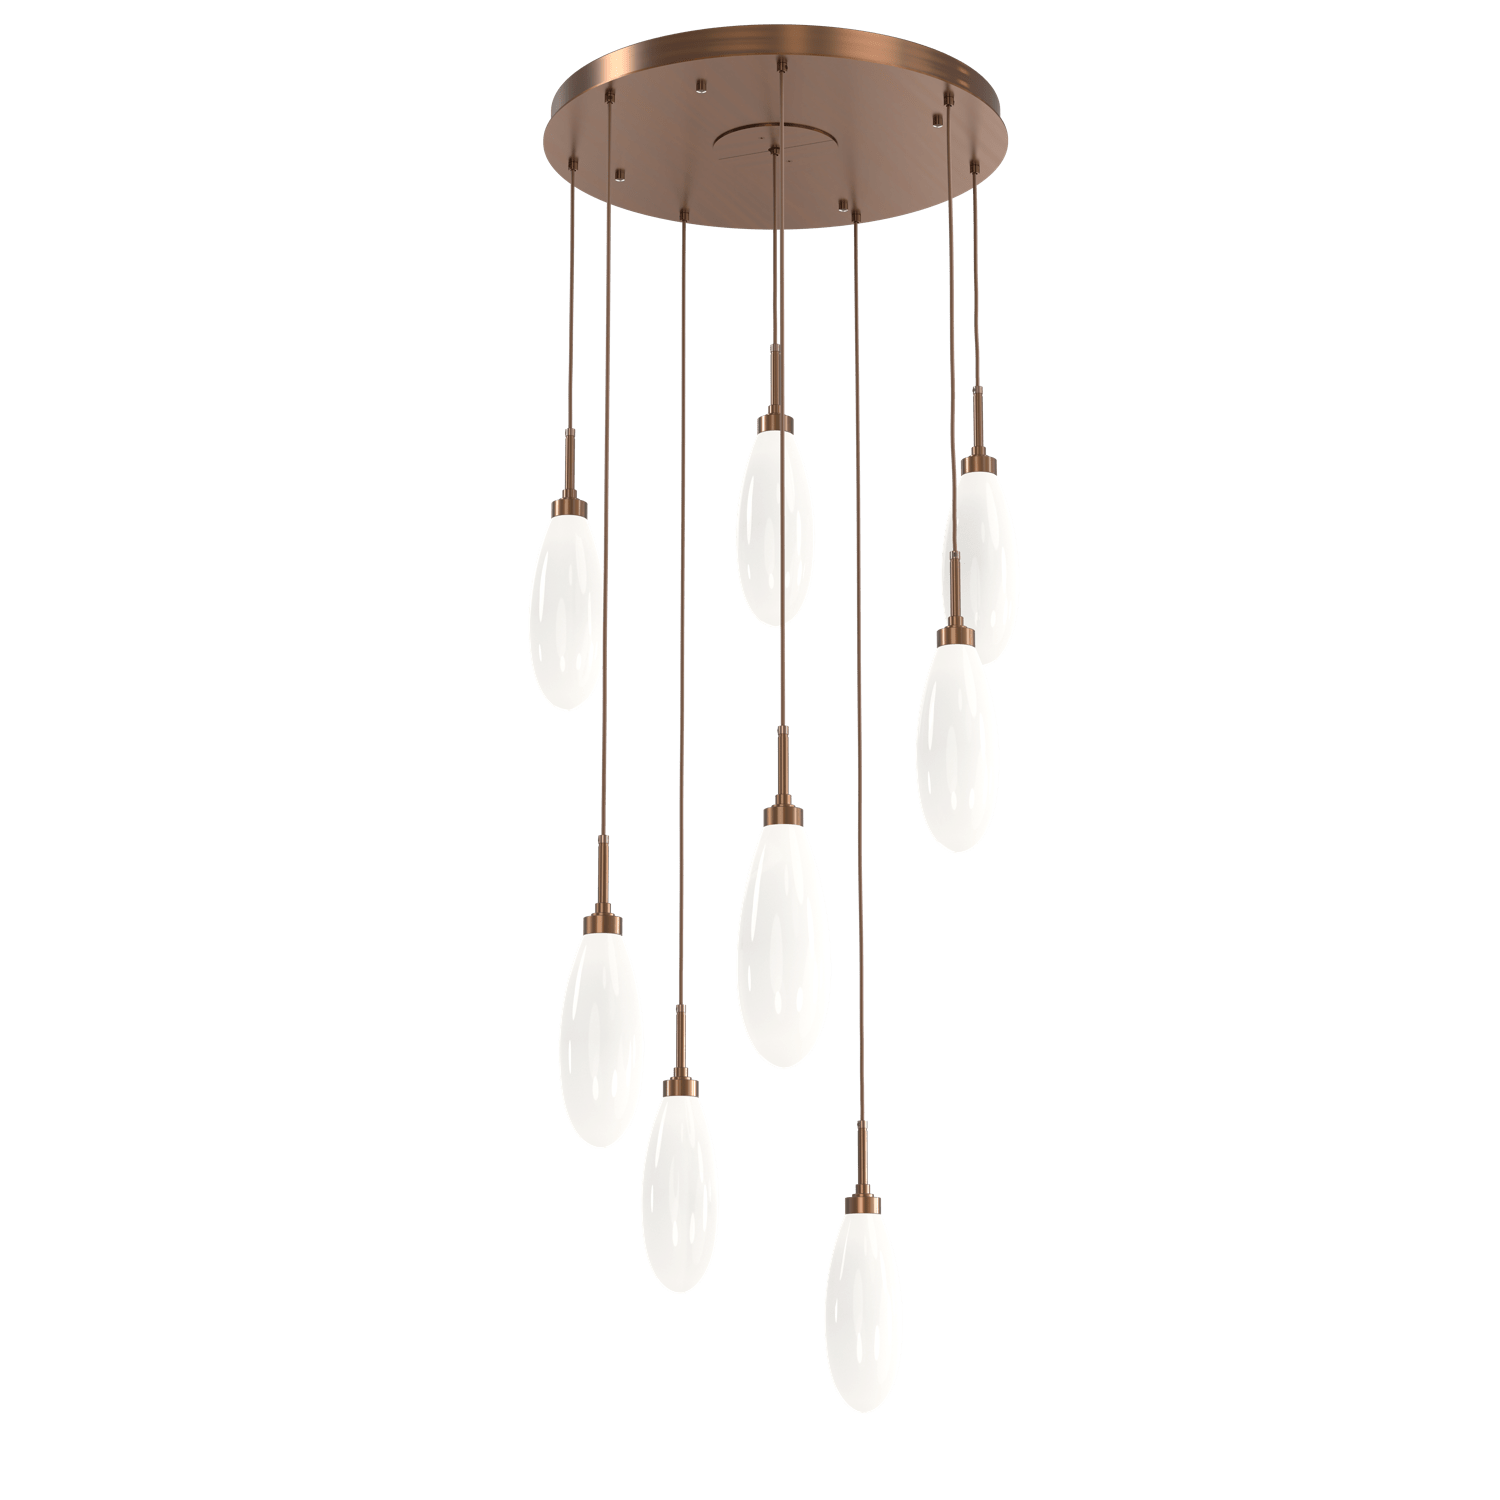 CHB0071-08-RB-WL-LL-Hammerton-Studio-Fiori-8-light-round-pendant-chandelier-with-oil-rubbed-bronze-finish-and-opal-white-glass-shades-and-LED-lamping